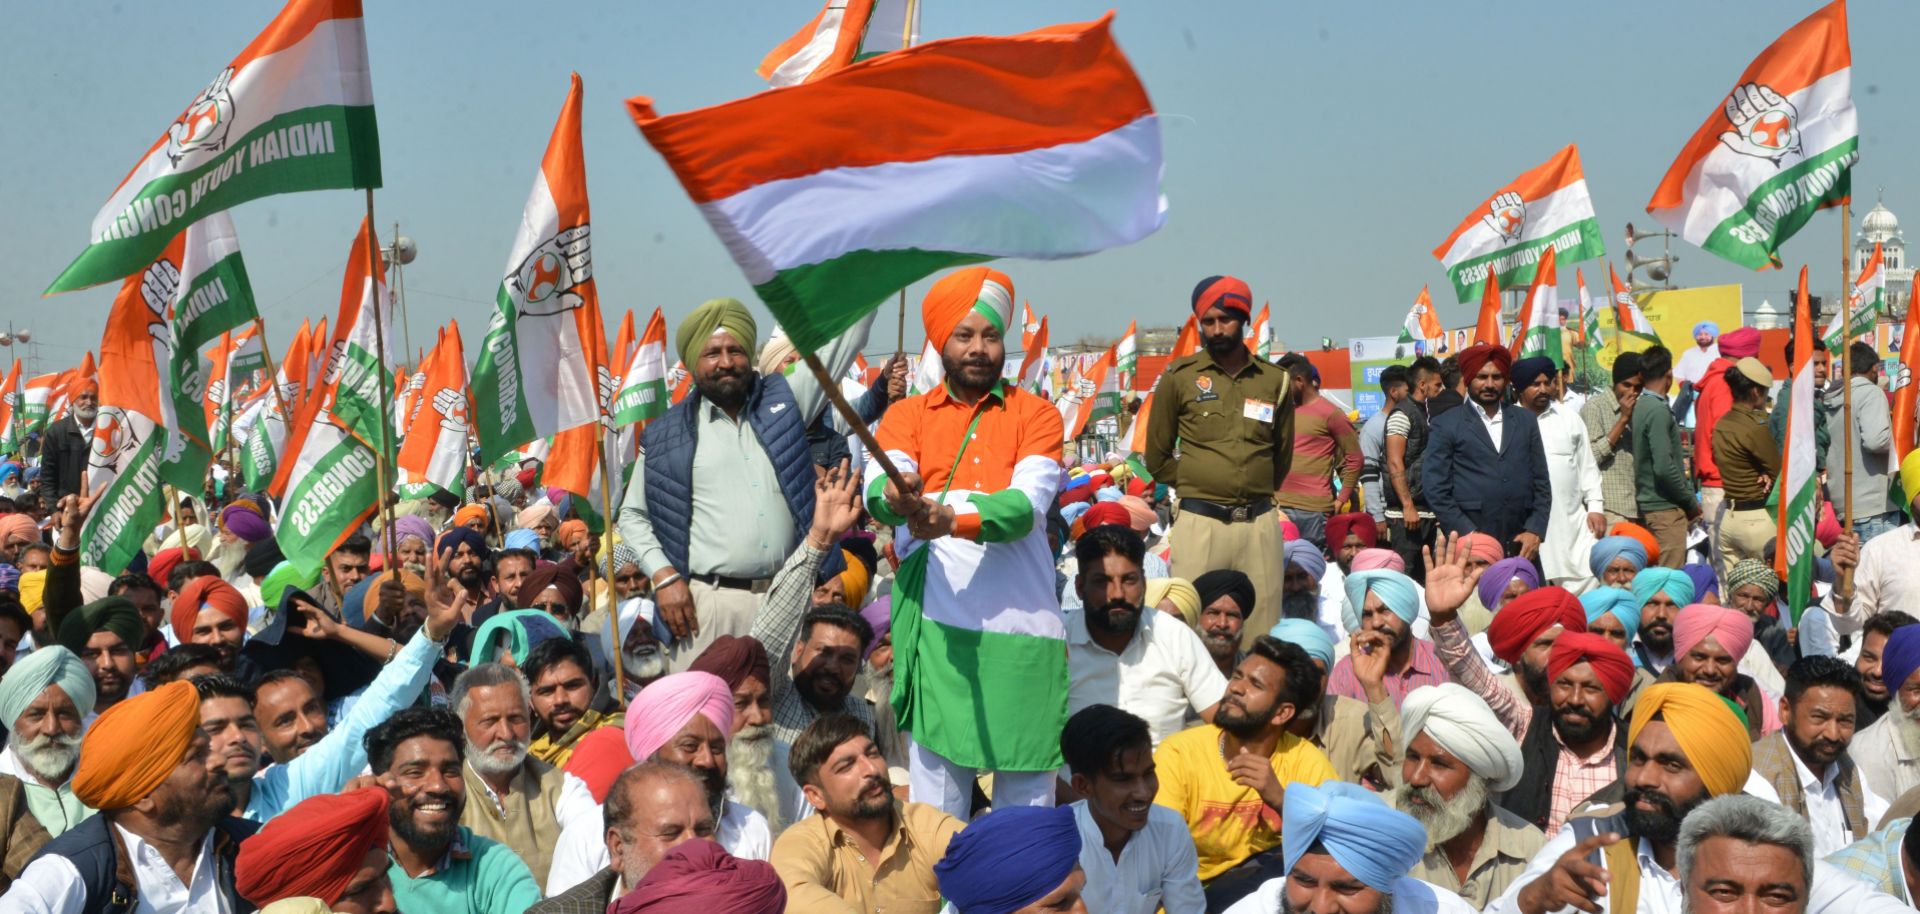 Supporters hold up flags in support of the Indian National Congress (INC) party during the launch of the party's campaign in Punjab ahead of India’s upcoming  elections.